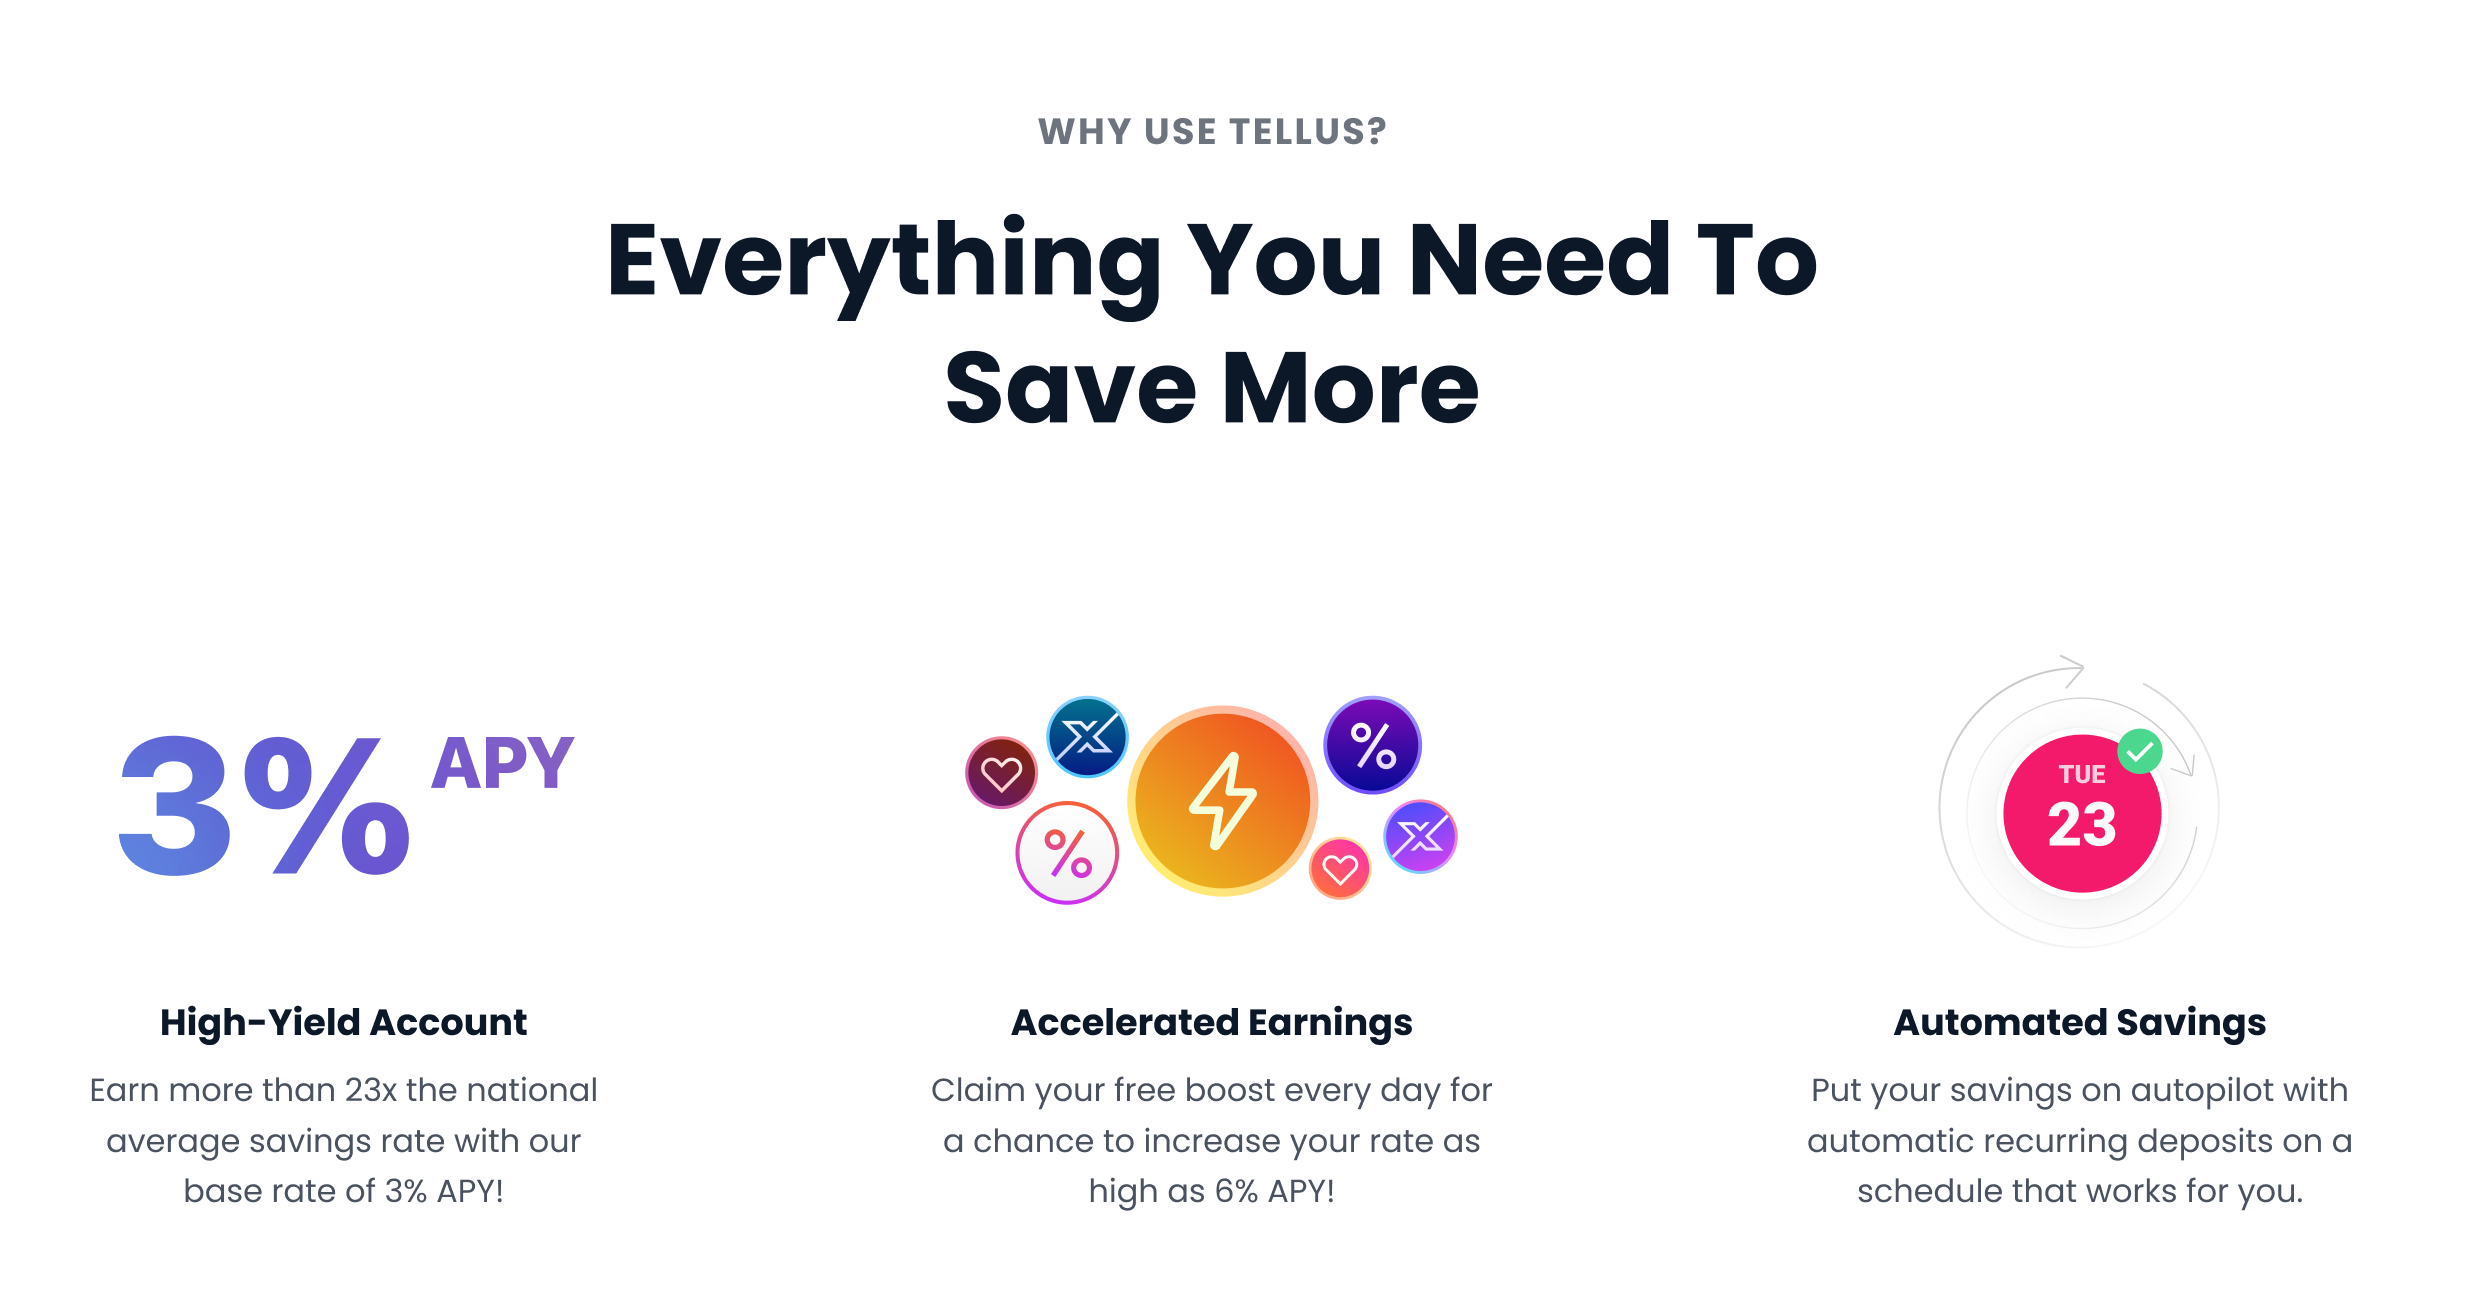 Benefits of using Tellus for your savings needs